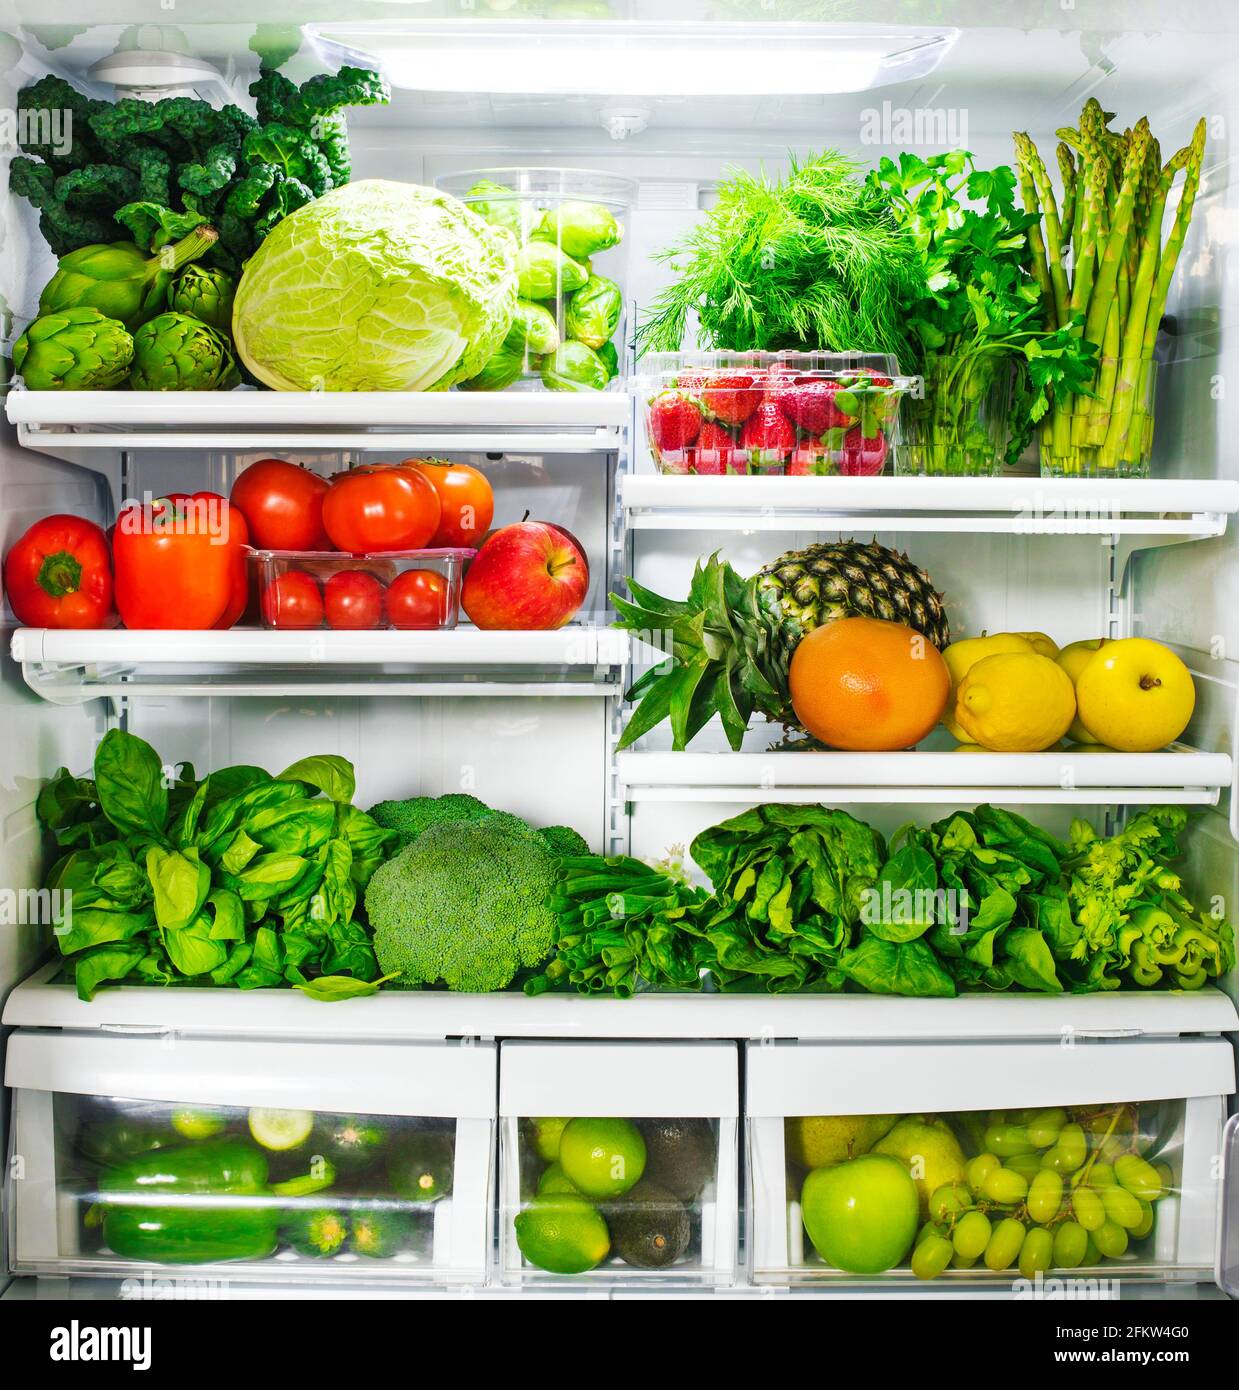 Fresh vegetables and fruits in fridge. Stock Photo